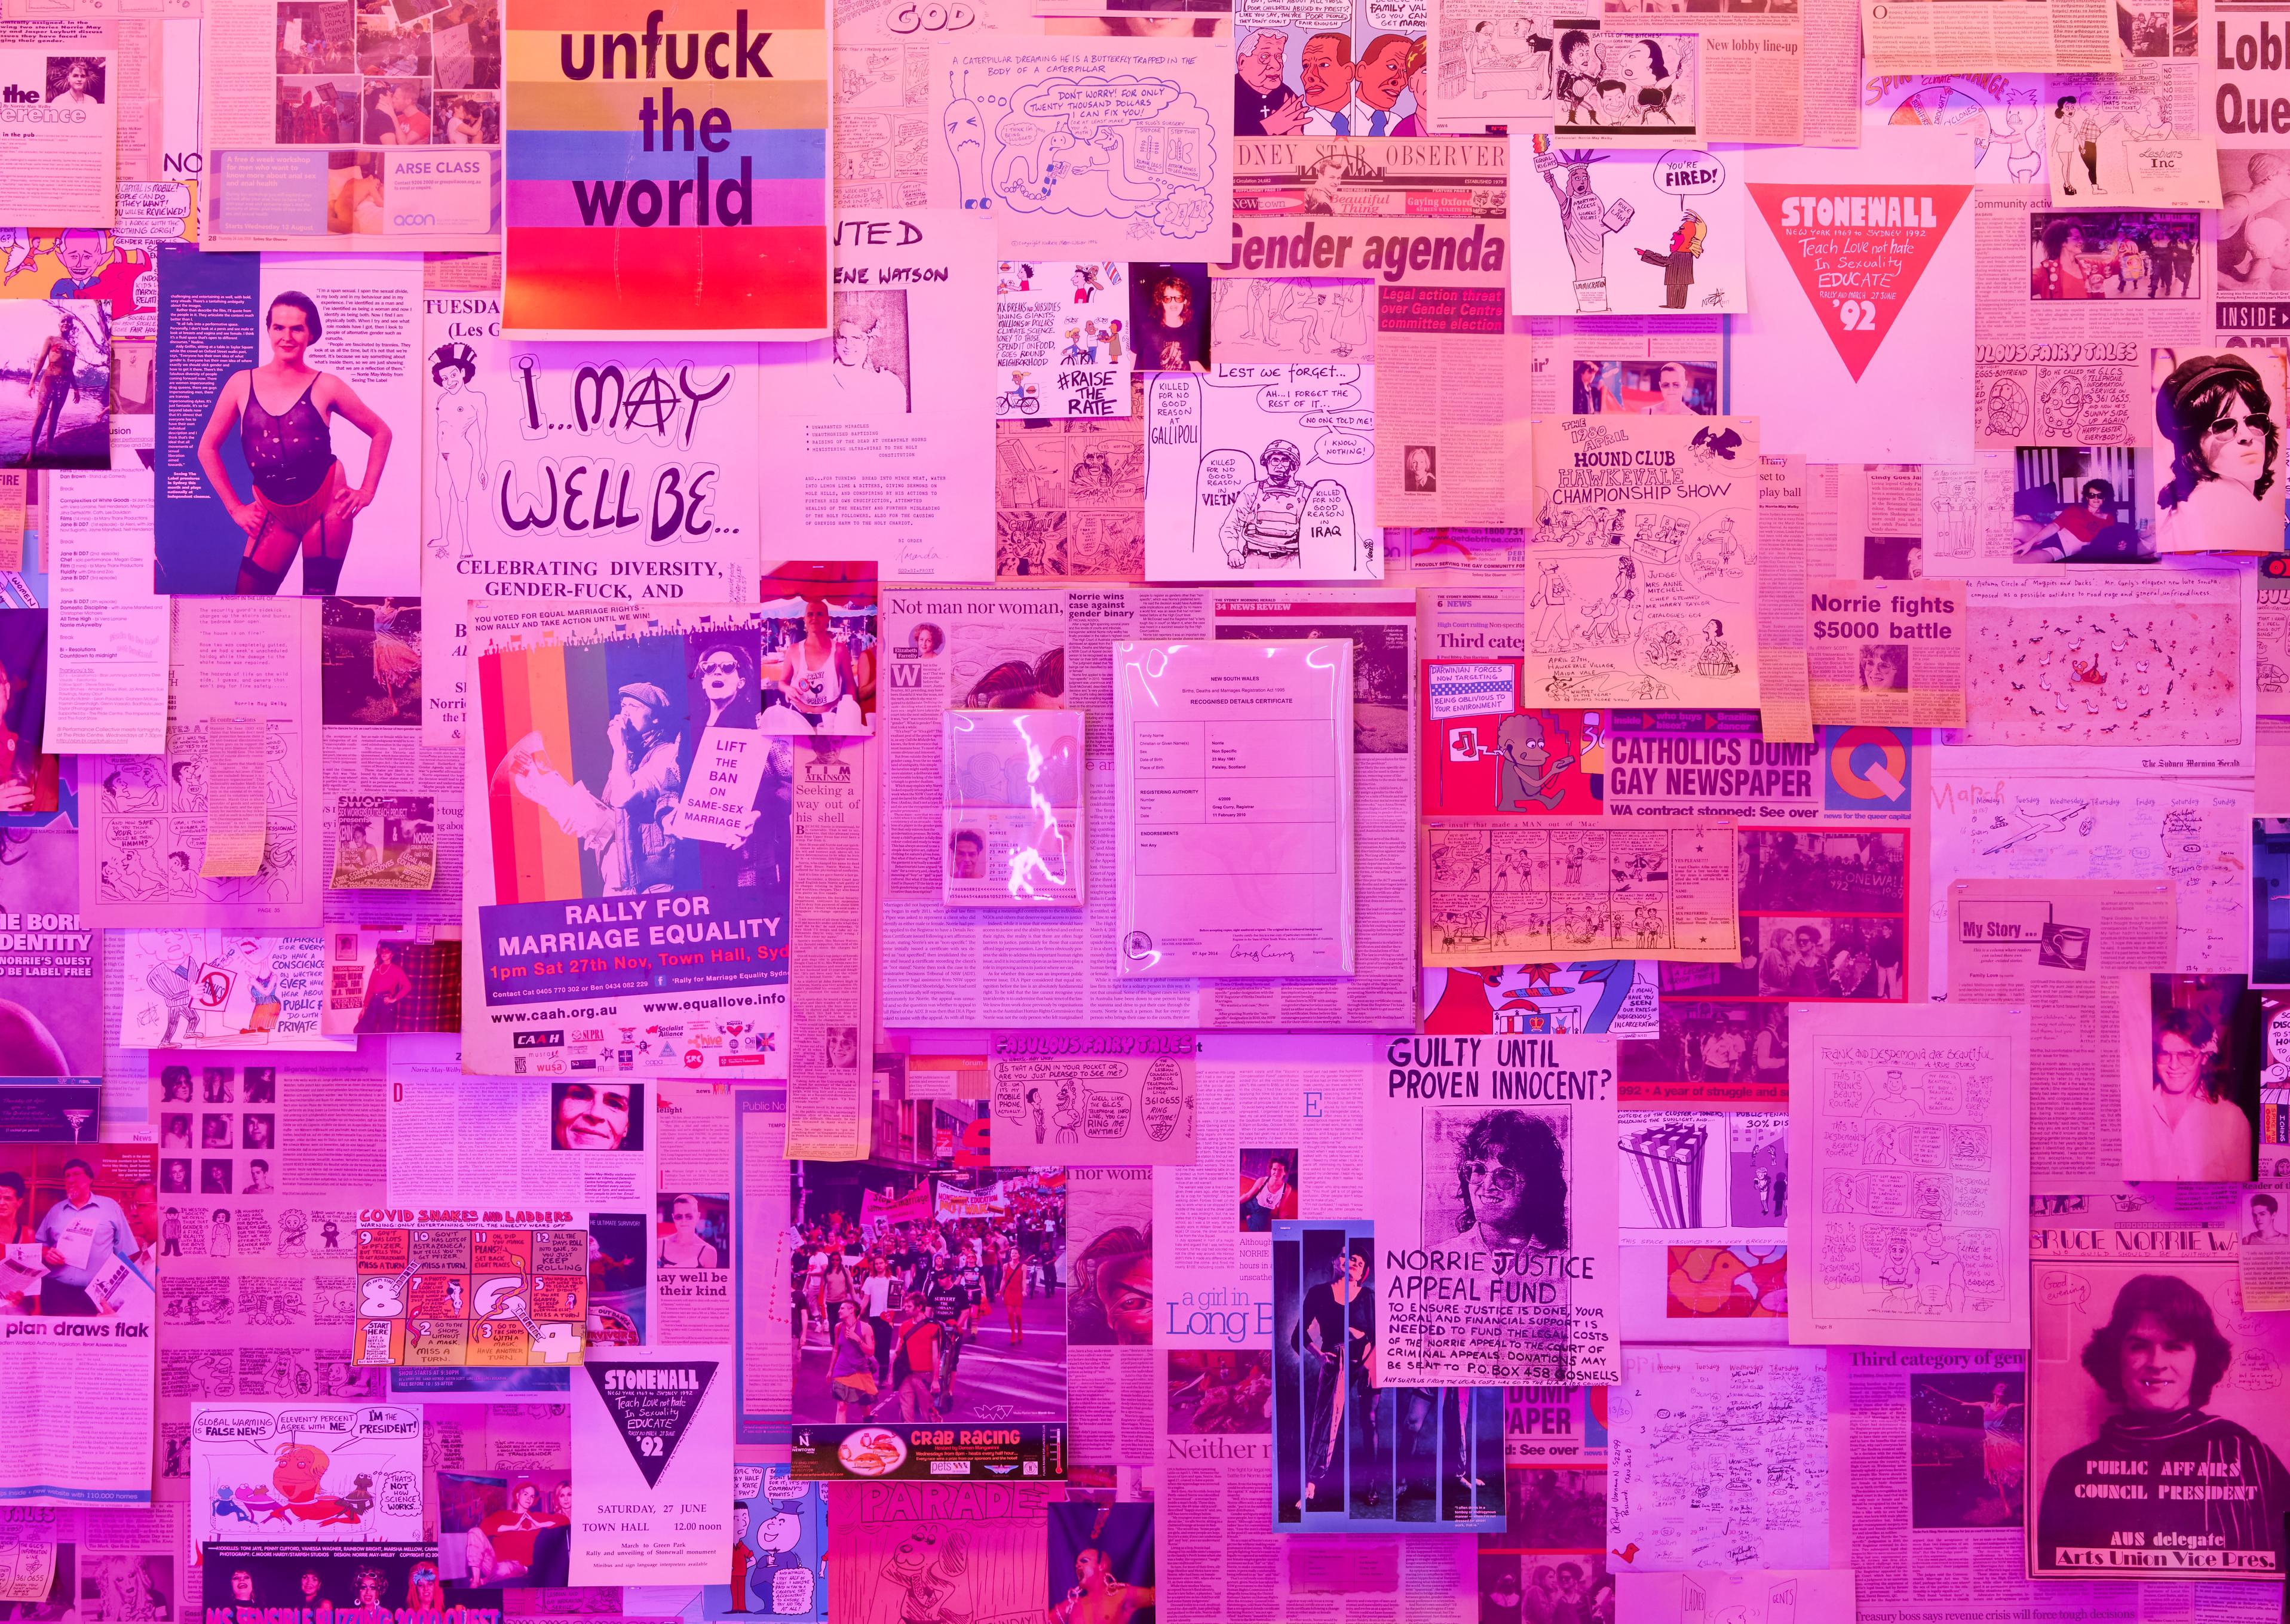 A wall with images, newspaper clippings, and posters collaged together cast with pink light. Mounted on the wall are two documents, a passport and birth certificate, under plexiglas.